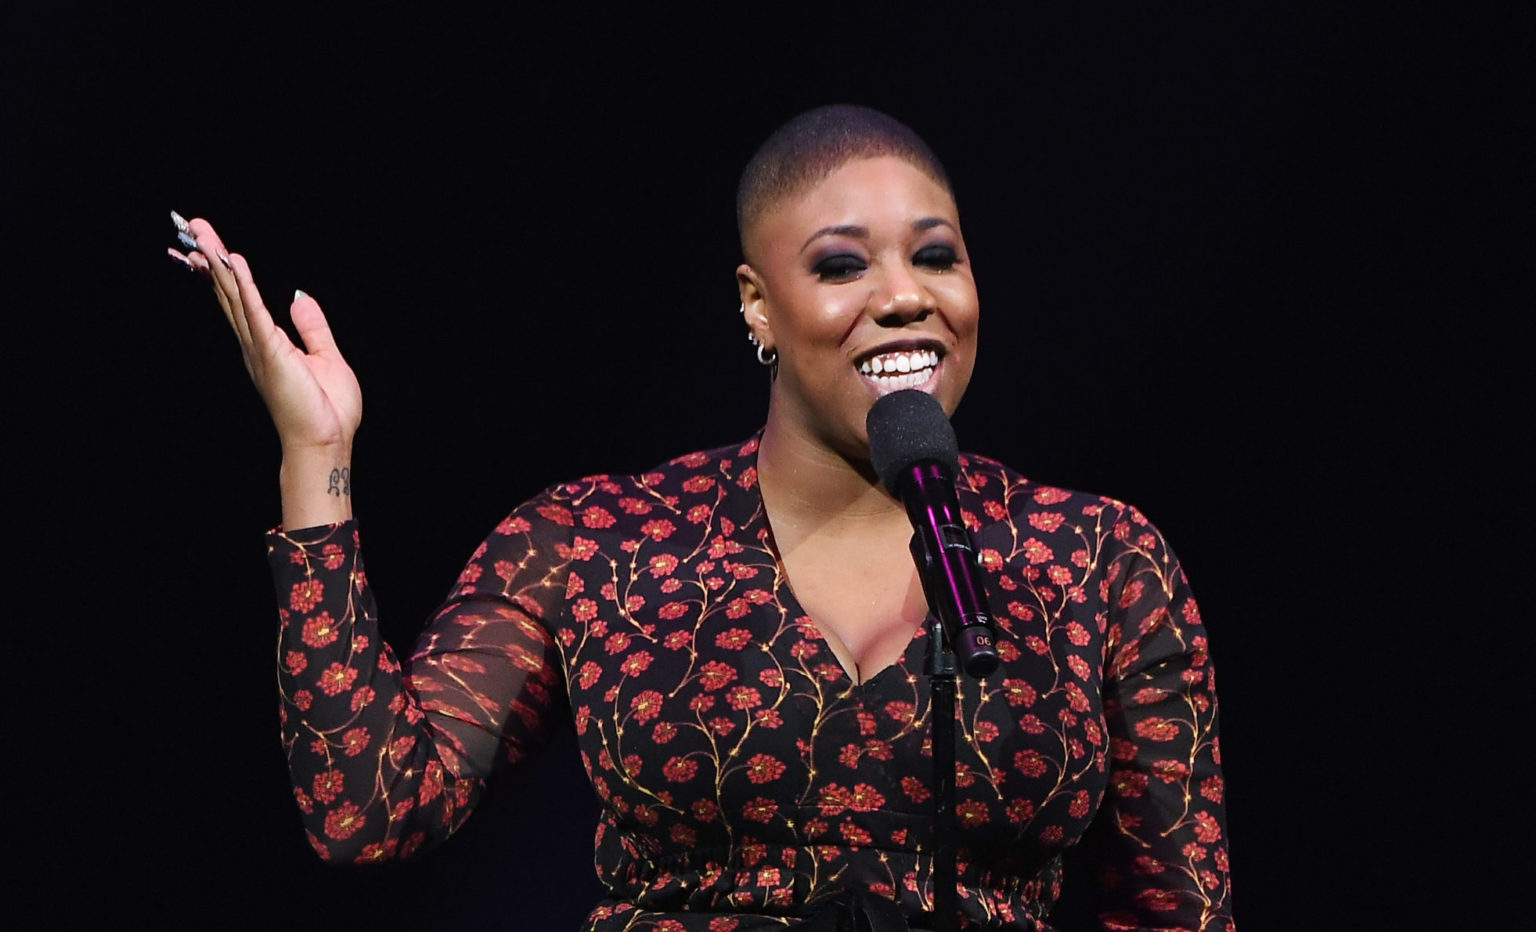 'It Was a Good Run': Viewers Are Eager to See Symone Sanders Back On TV